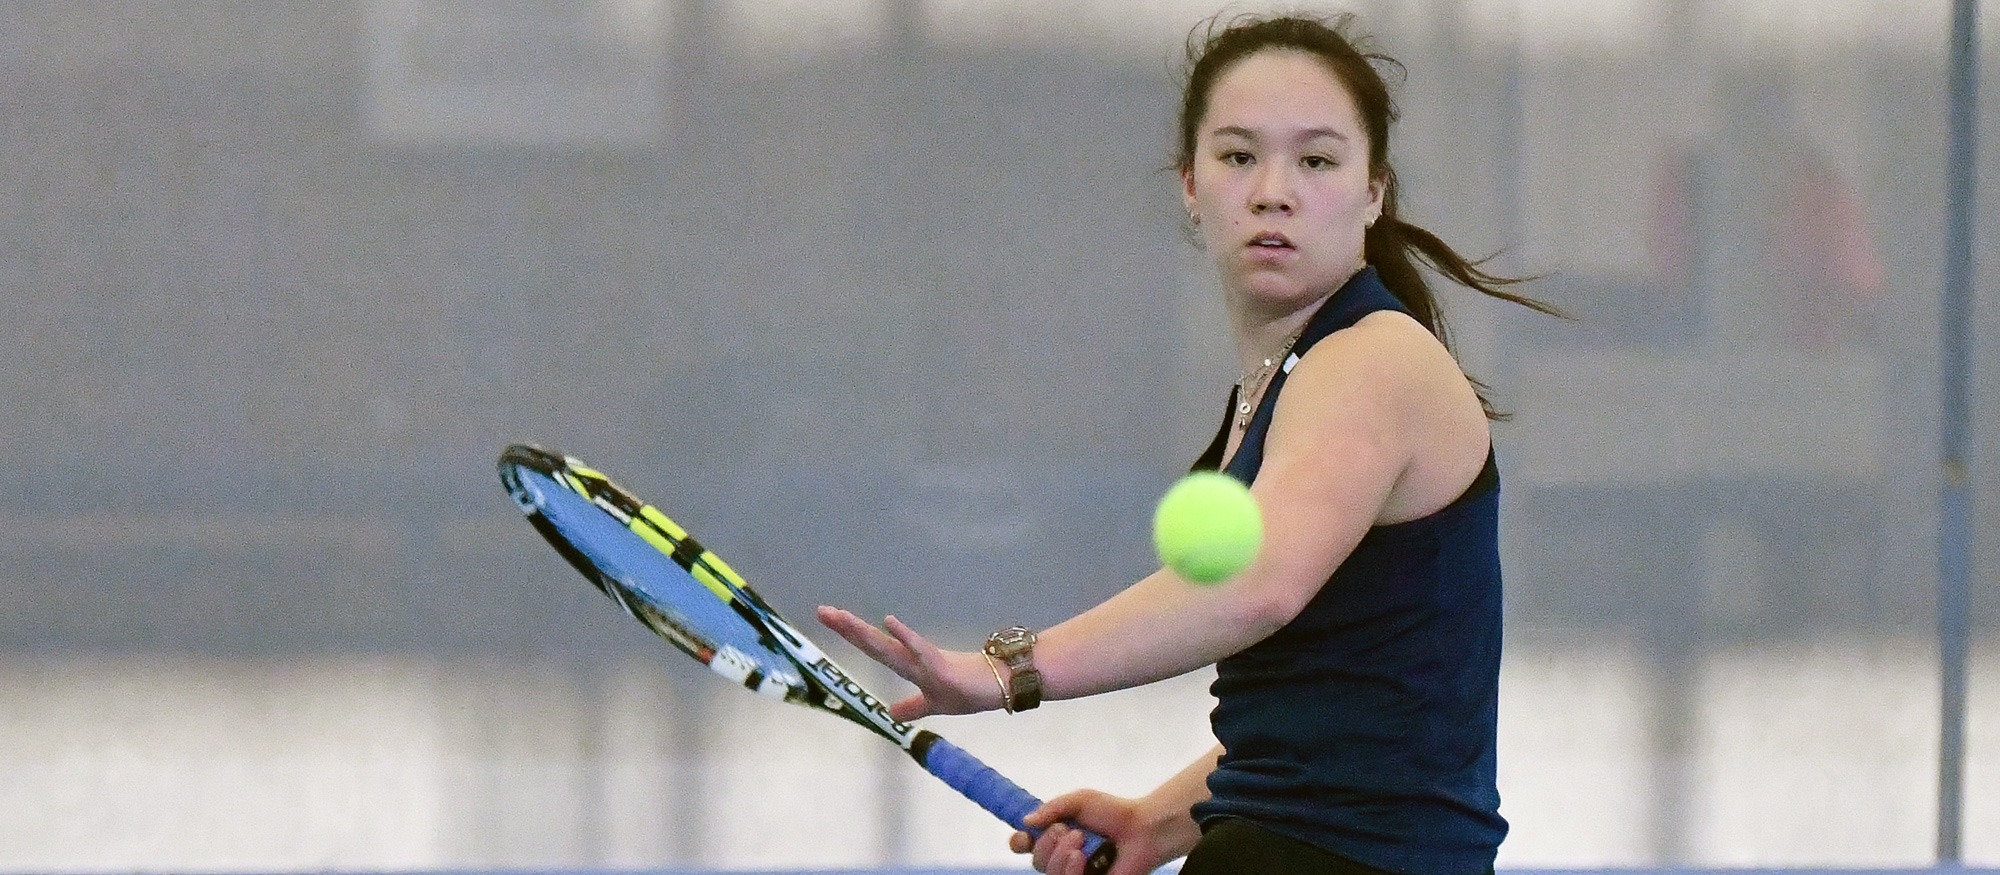 Annika Chai (pictured) and Jaskirat Kaur won two straight matchups against opponents from Smith and Wellesley on Oct. 8, 2022, to reach the consolation championship match of the NEWITT B Draw. (RJB Sports file photo)